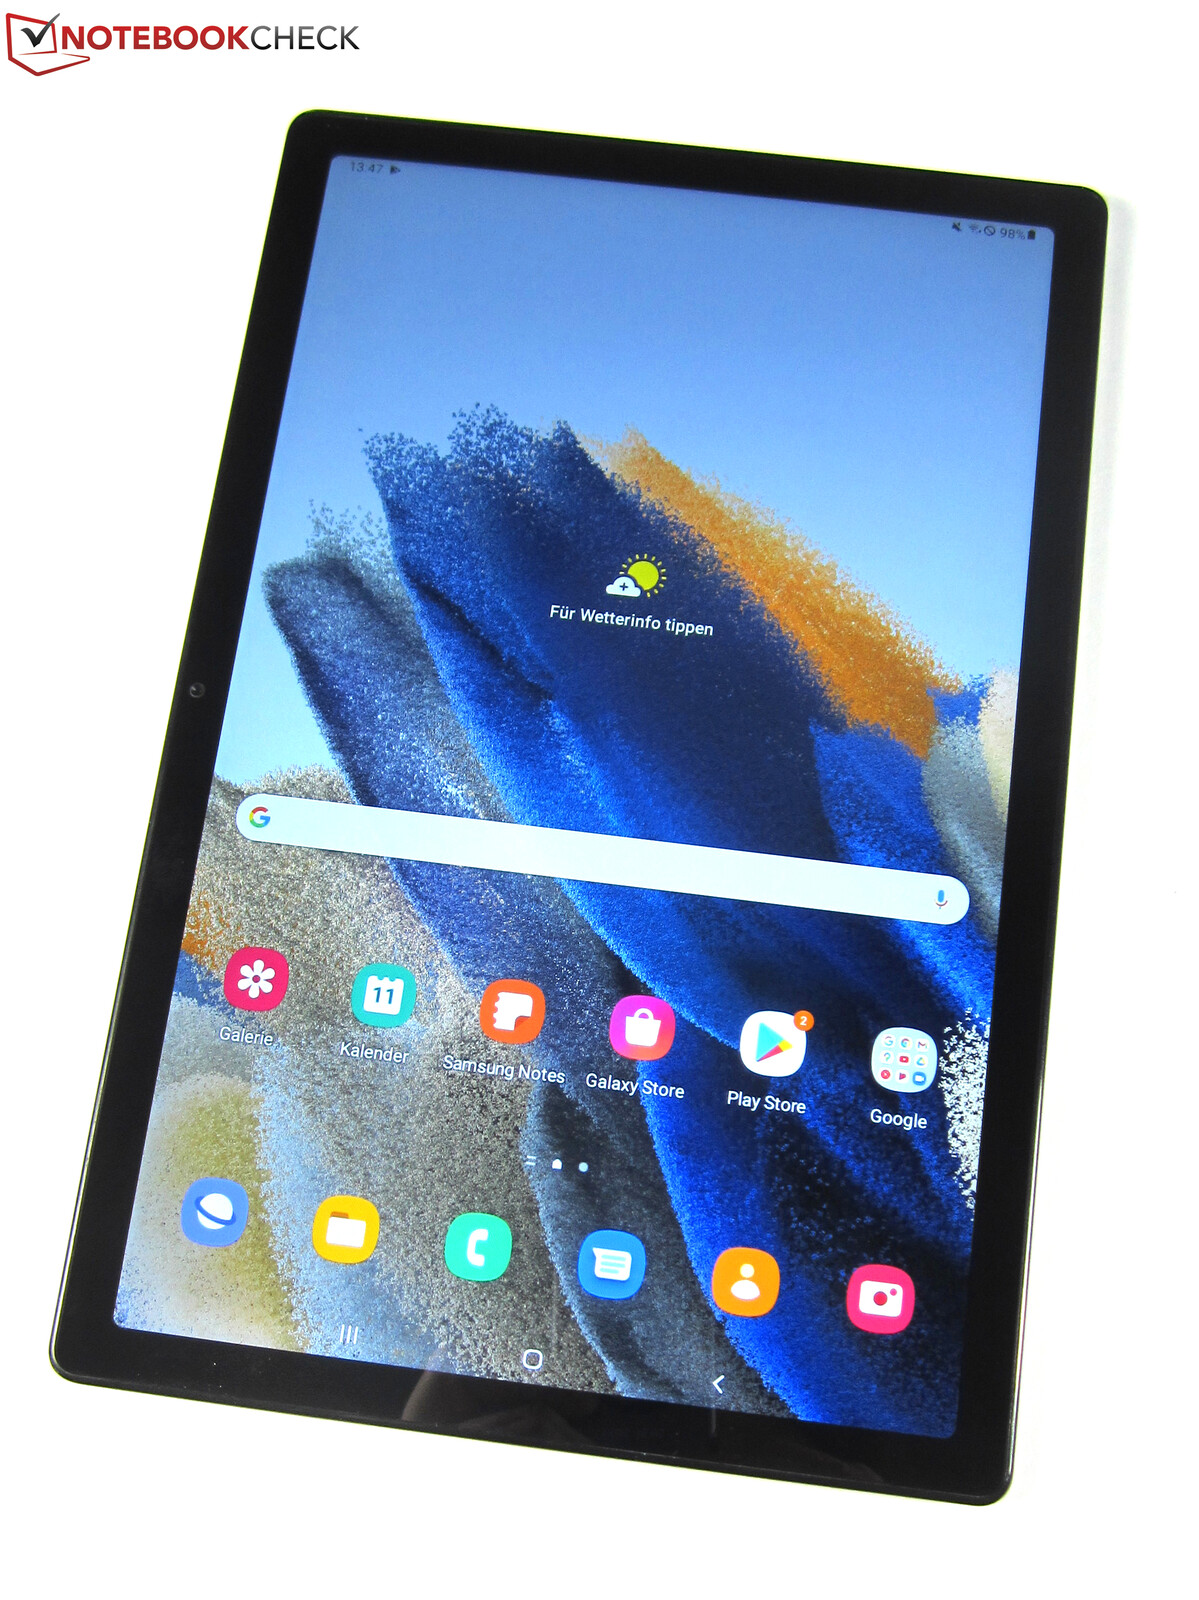 Samsung Galaxy Tab A8 - The new edition of the affordable mid-range tablet  - NotebookCheck.net News